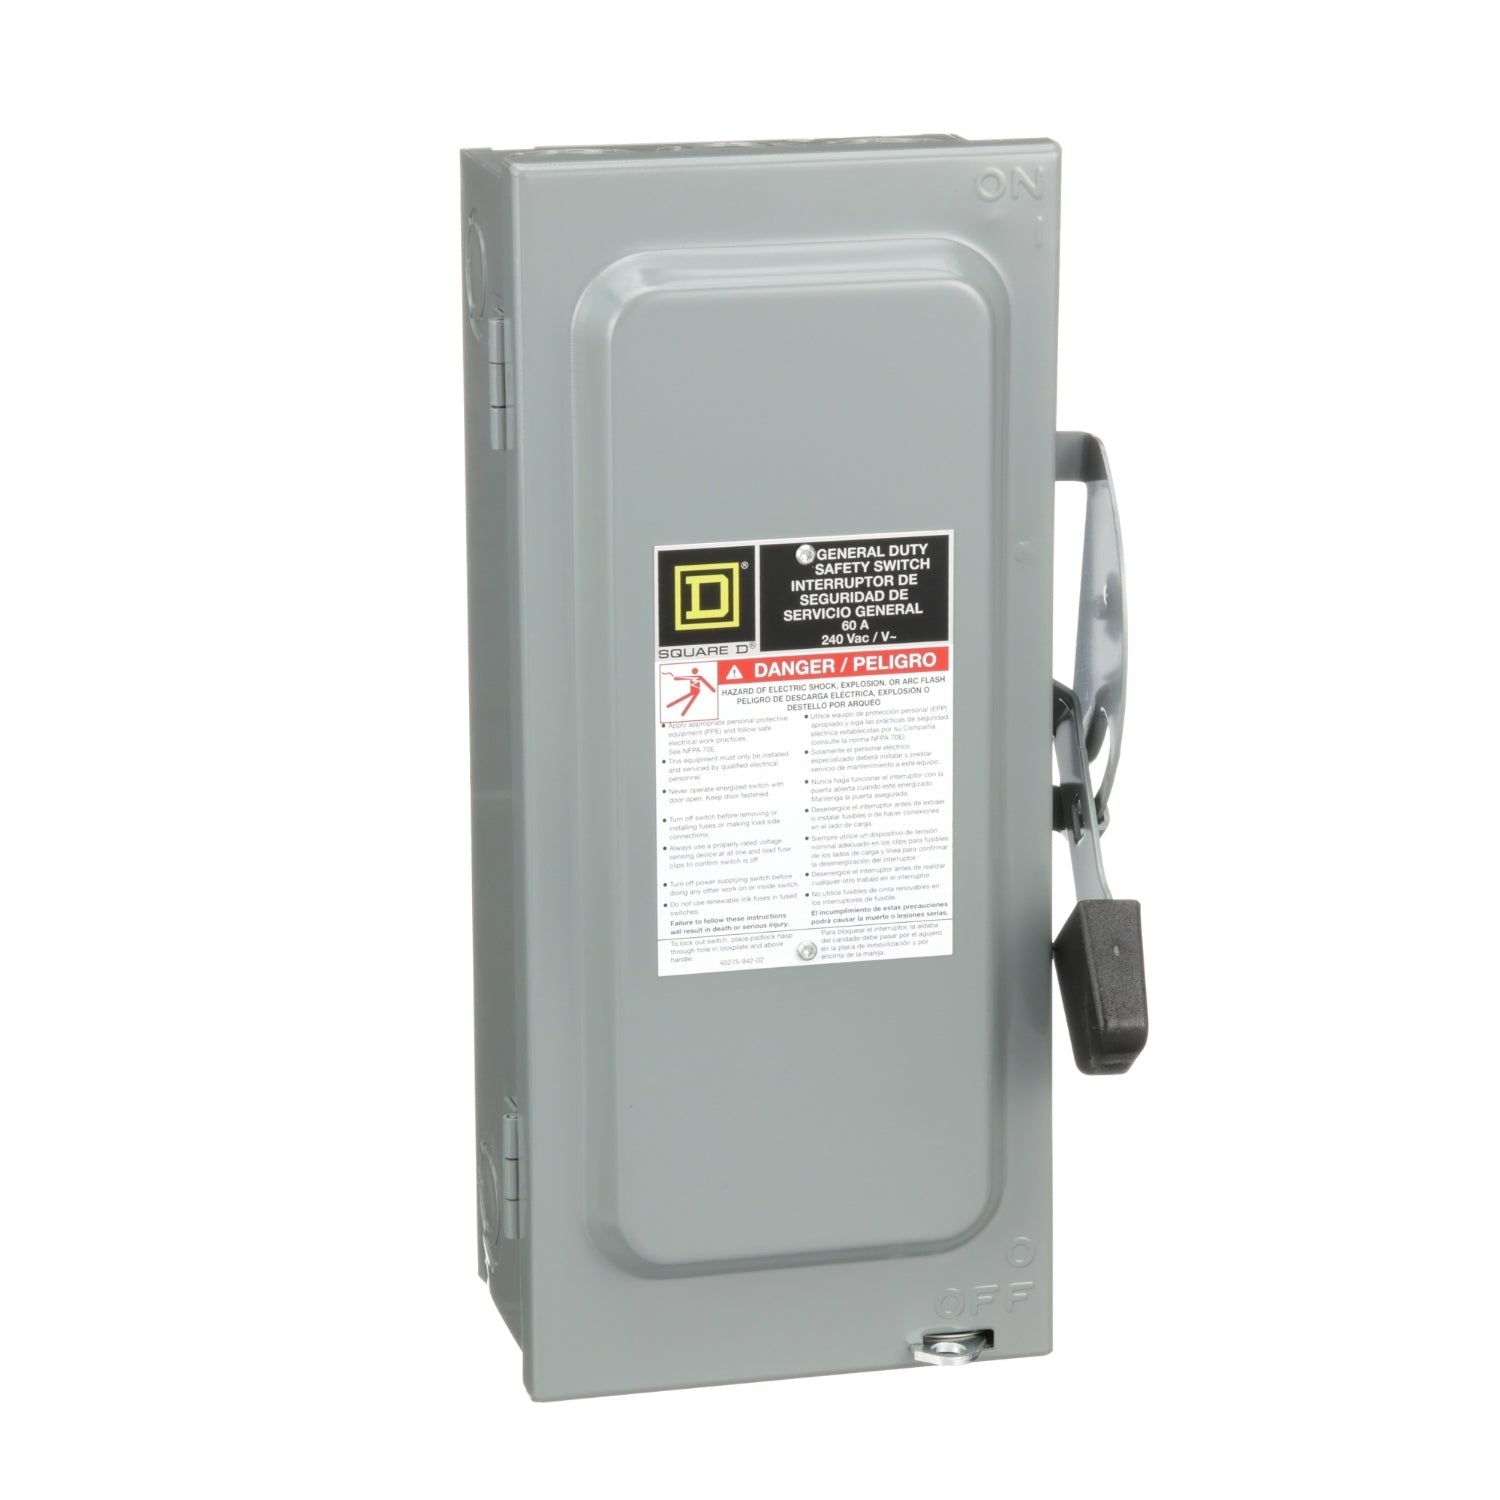 D222N - Square D 60 Amp 2 Pole 240 Volt Disconnect and Safety Switch